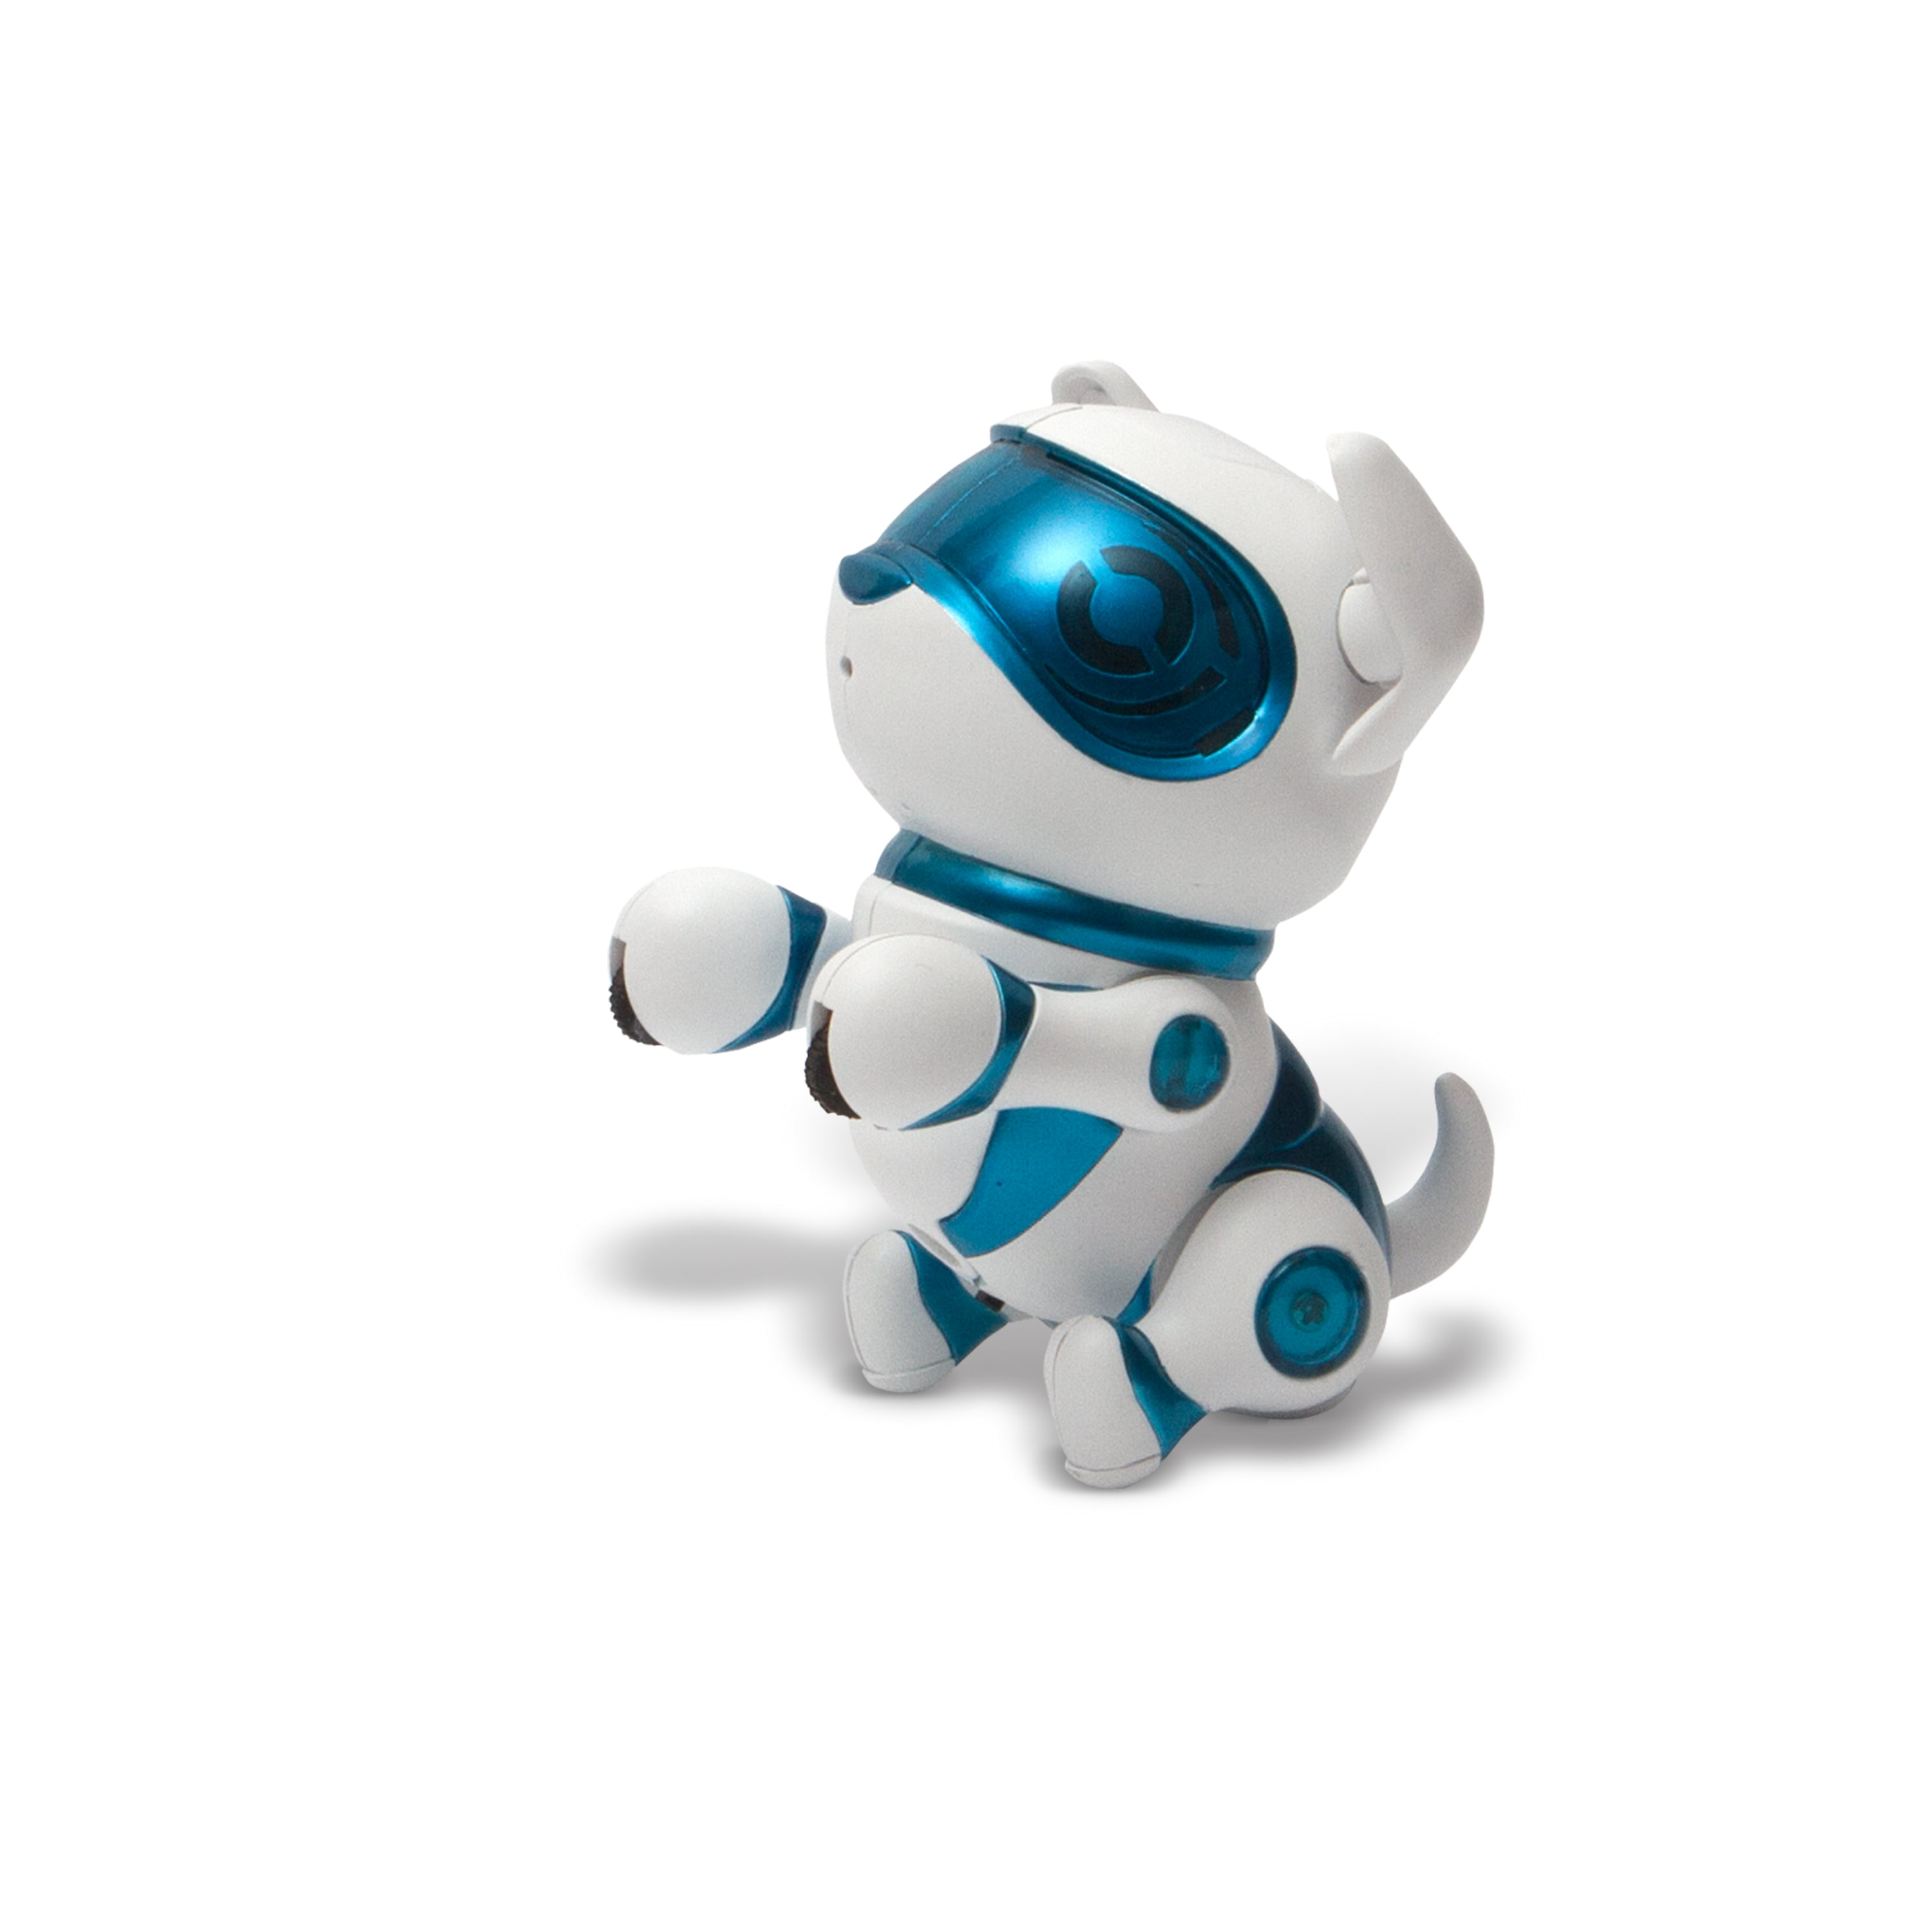 Techno The Robotic Dog Tekno Pet Robot Pets For Kids Interactive Puppy Toys Blue 